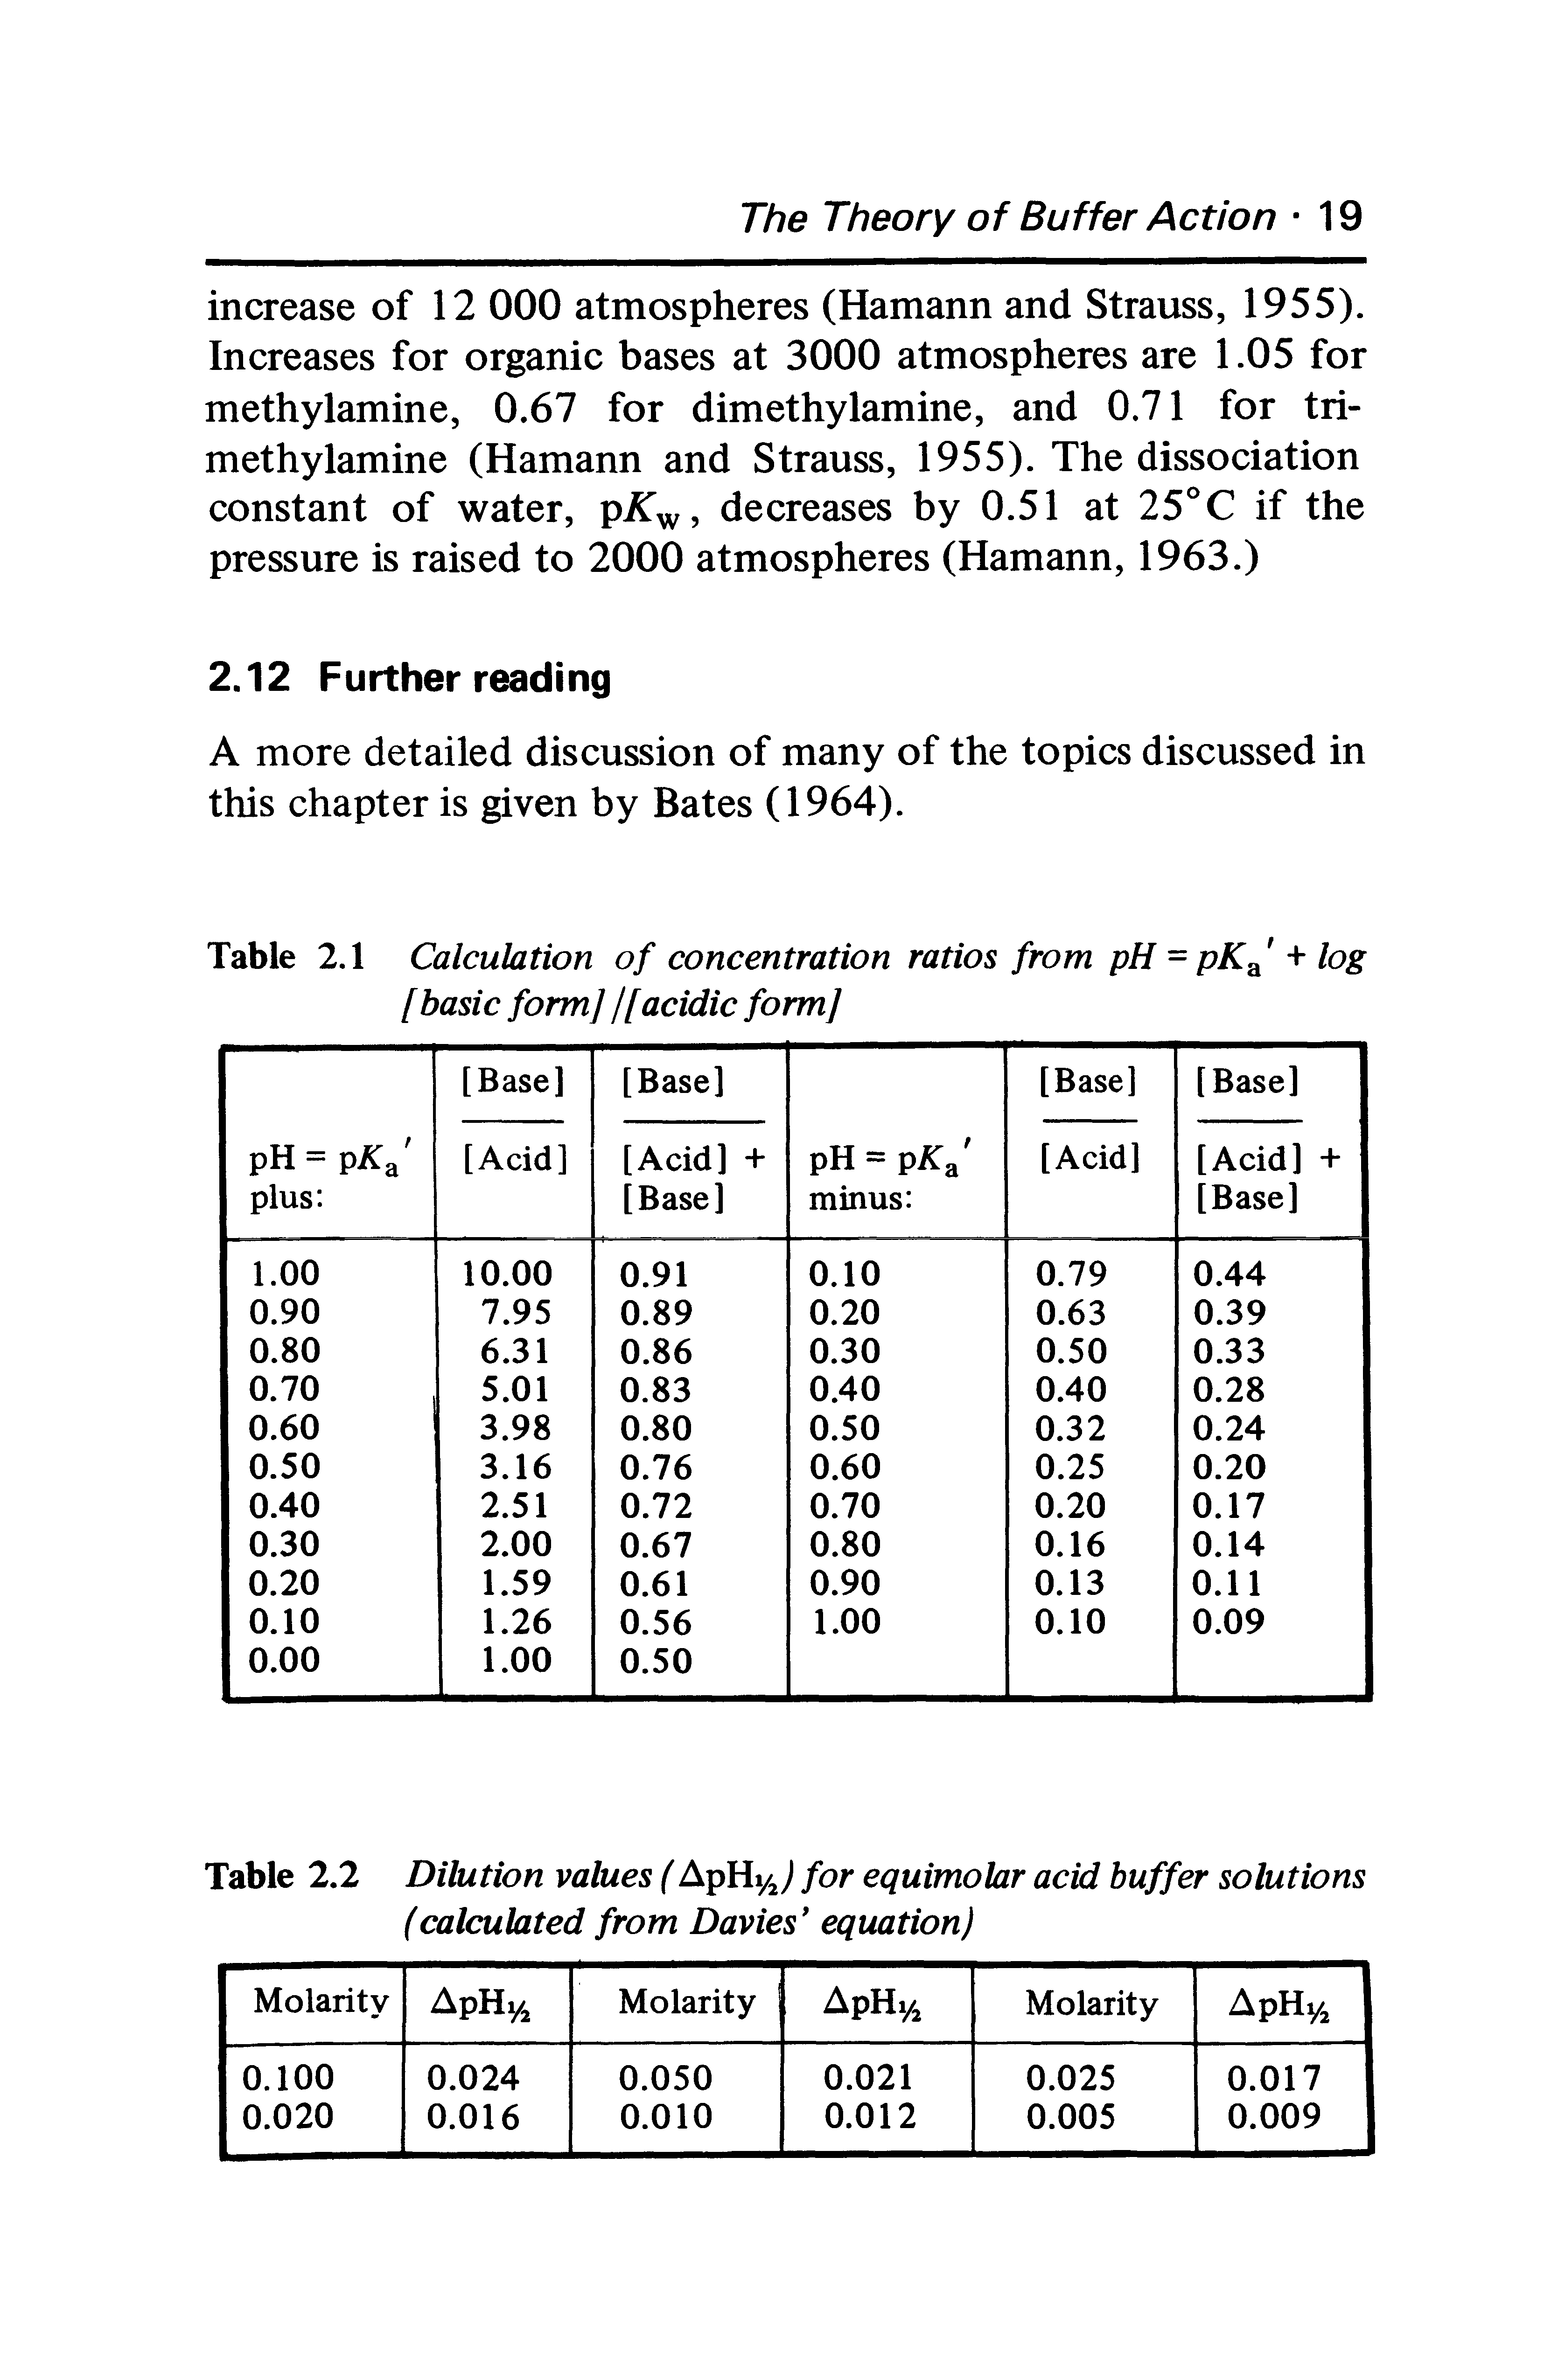 Table 2.2 Dilution values (ApHy,) for equimolar acid buffer solutions (calculated from Davies equation)...